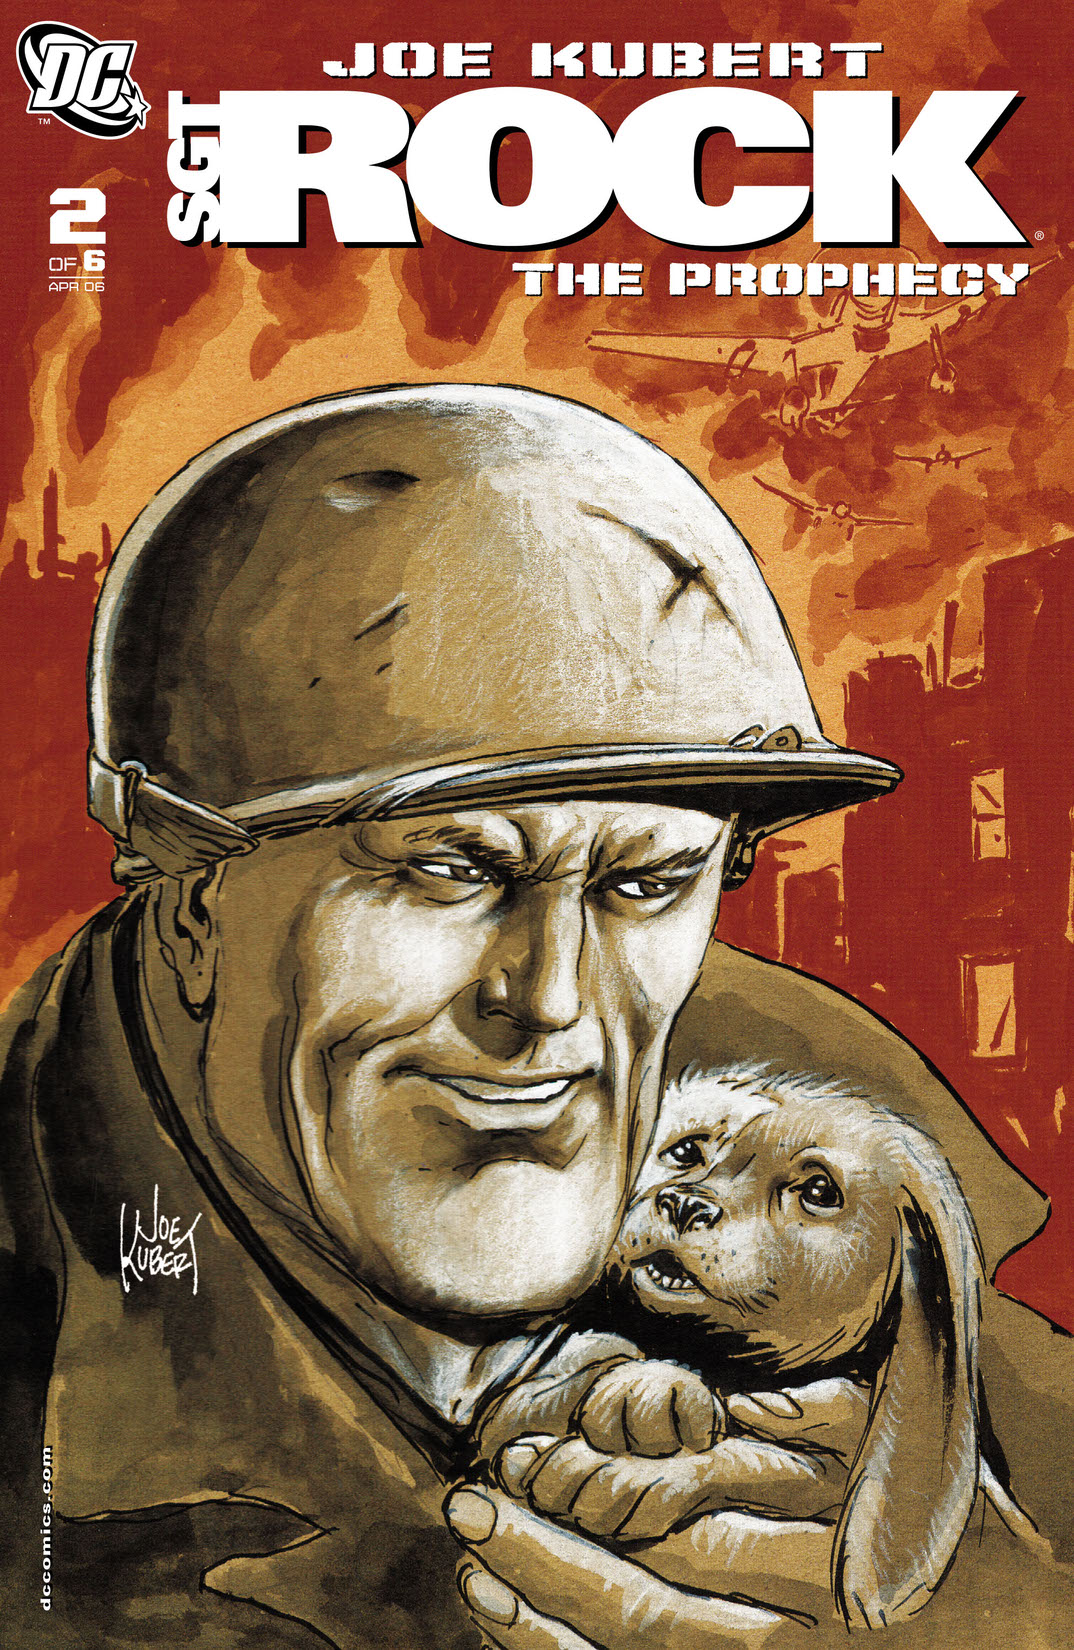 Sgt. Rock: The Prophecy #2 preview images